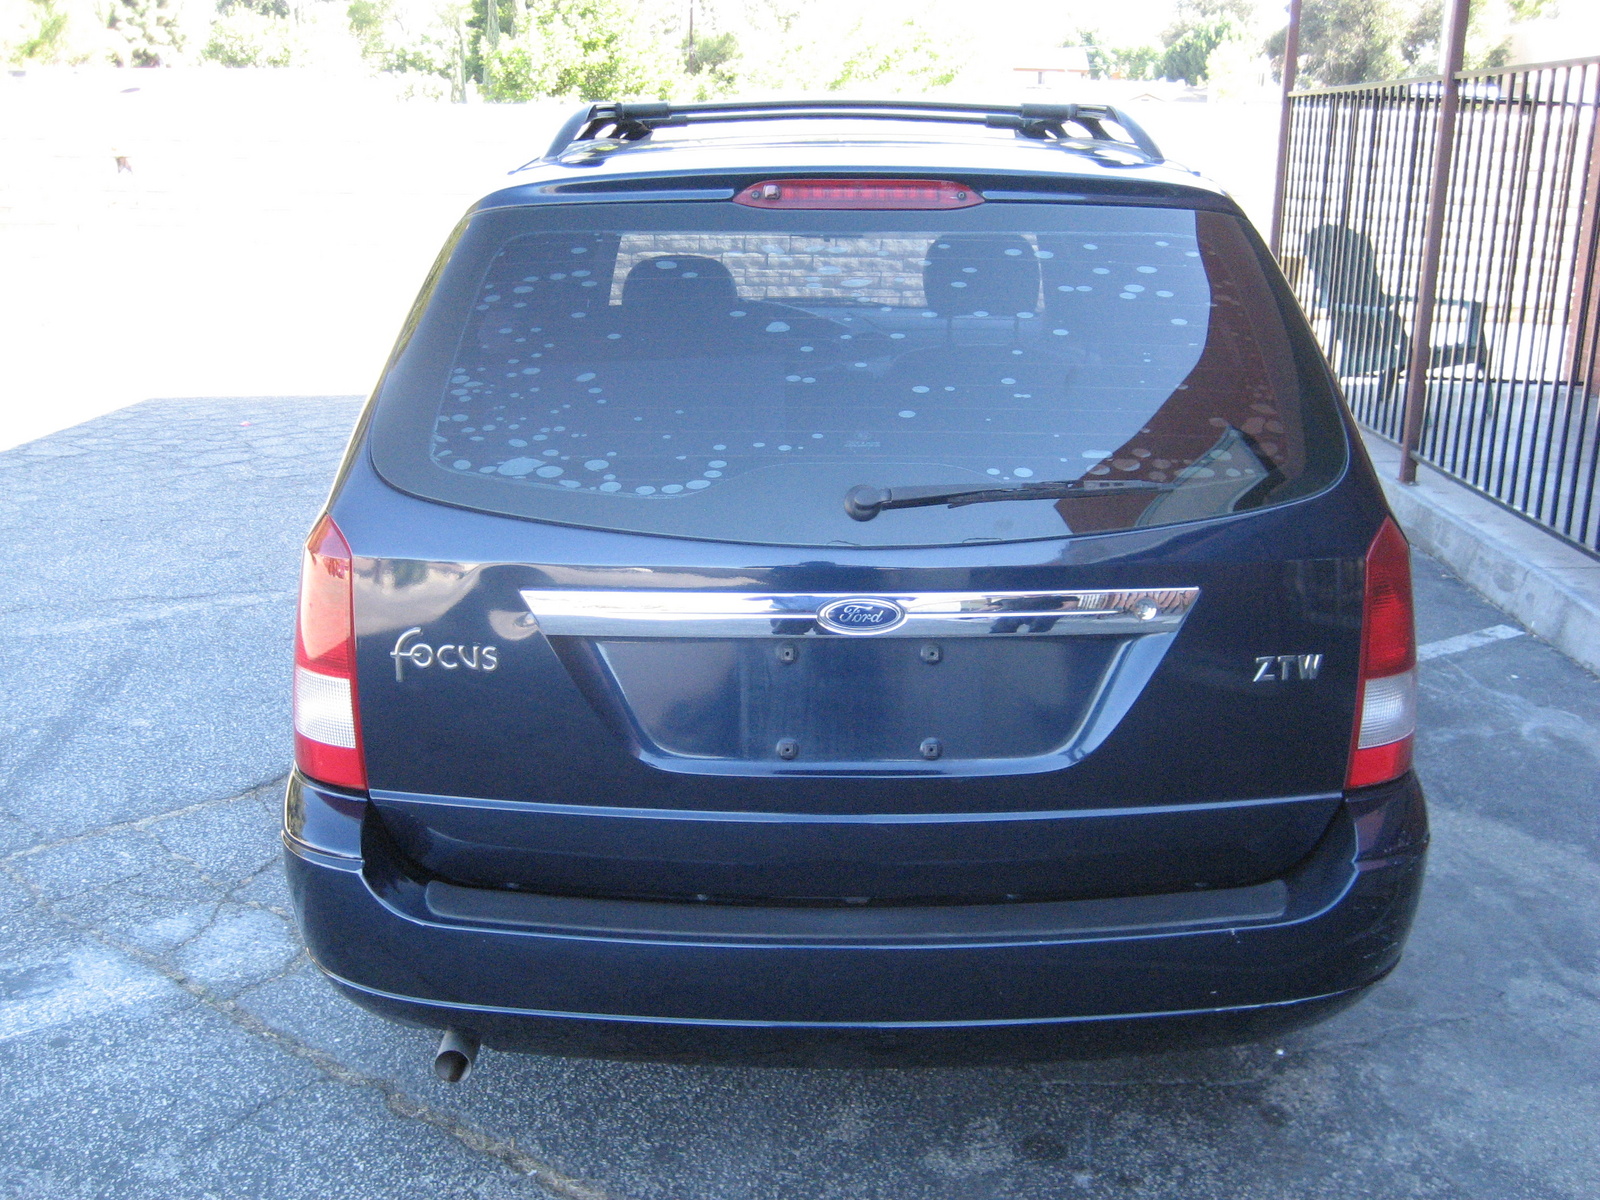 2002 Ford focus wagon cargo cover #10